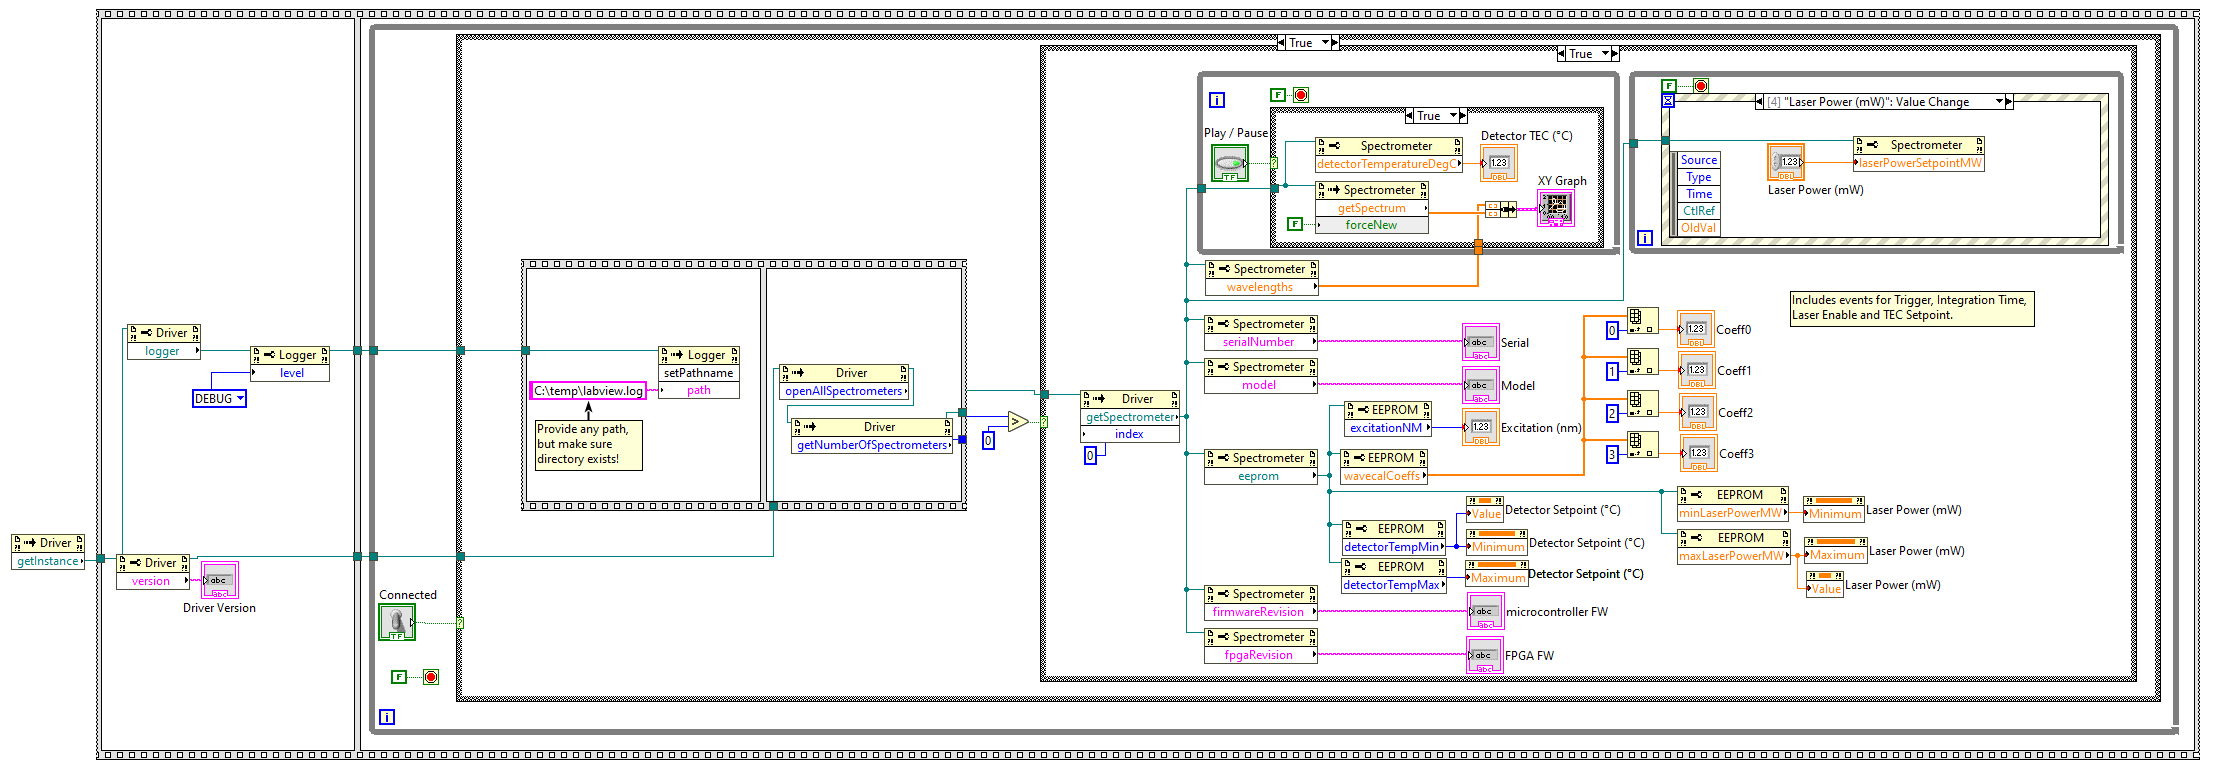 LabVIEW sample code